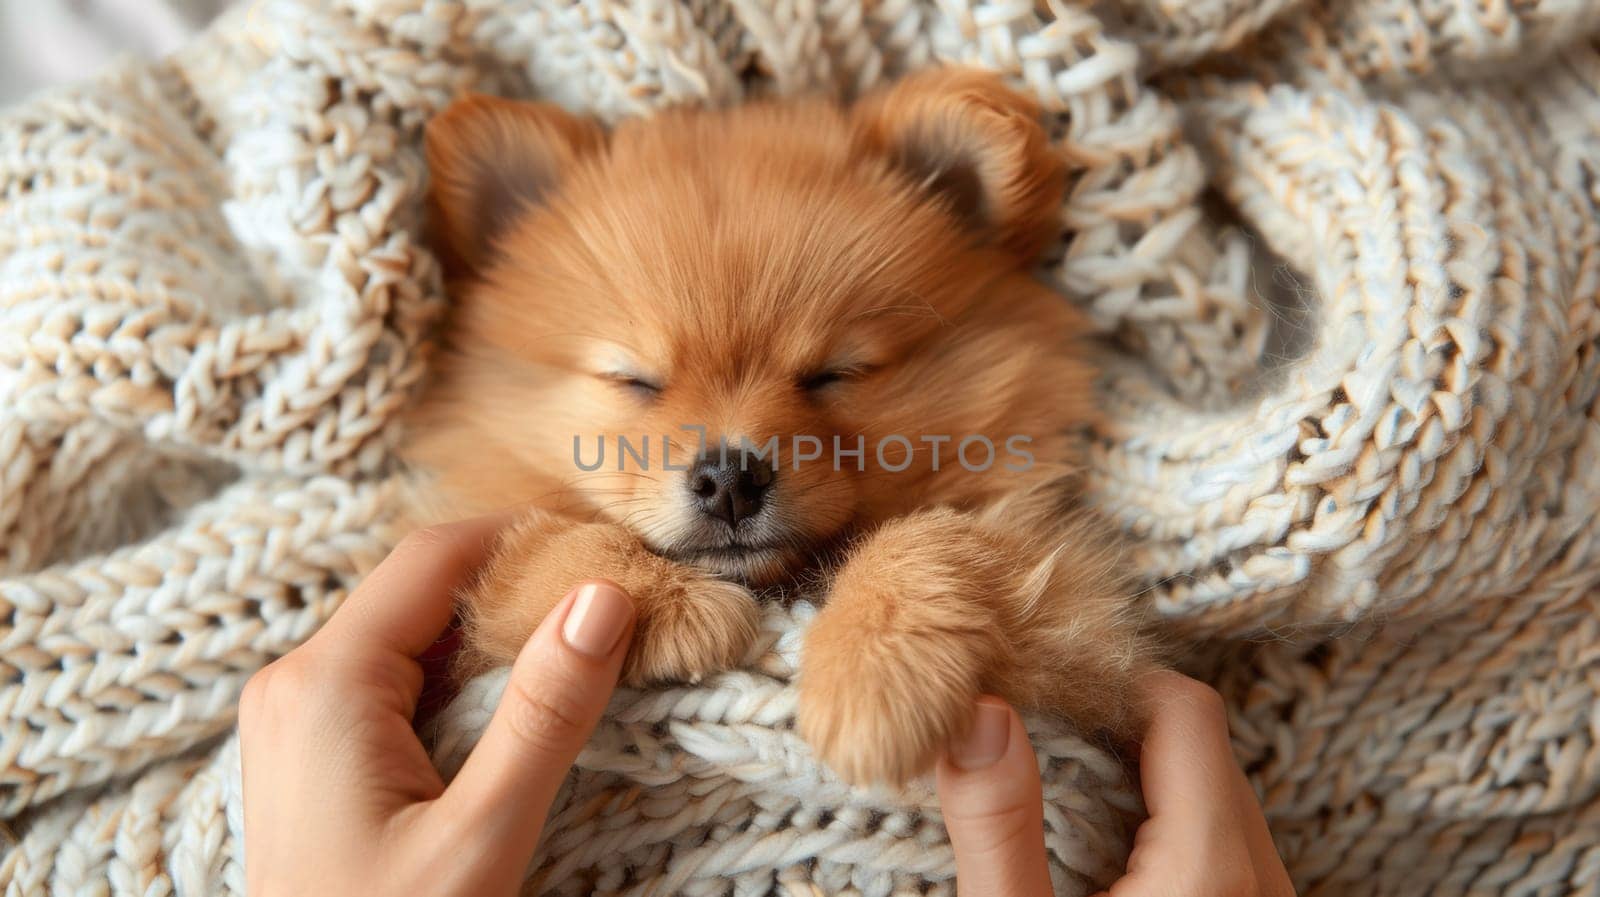 A small dog is wrapped in a blanket and being held by two hands, AI by starush